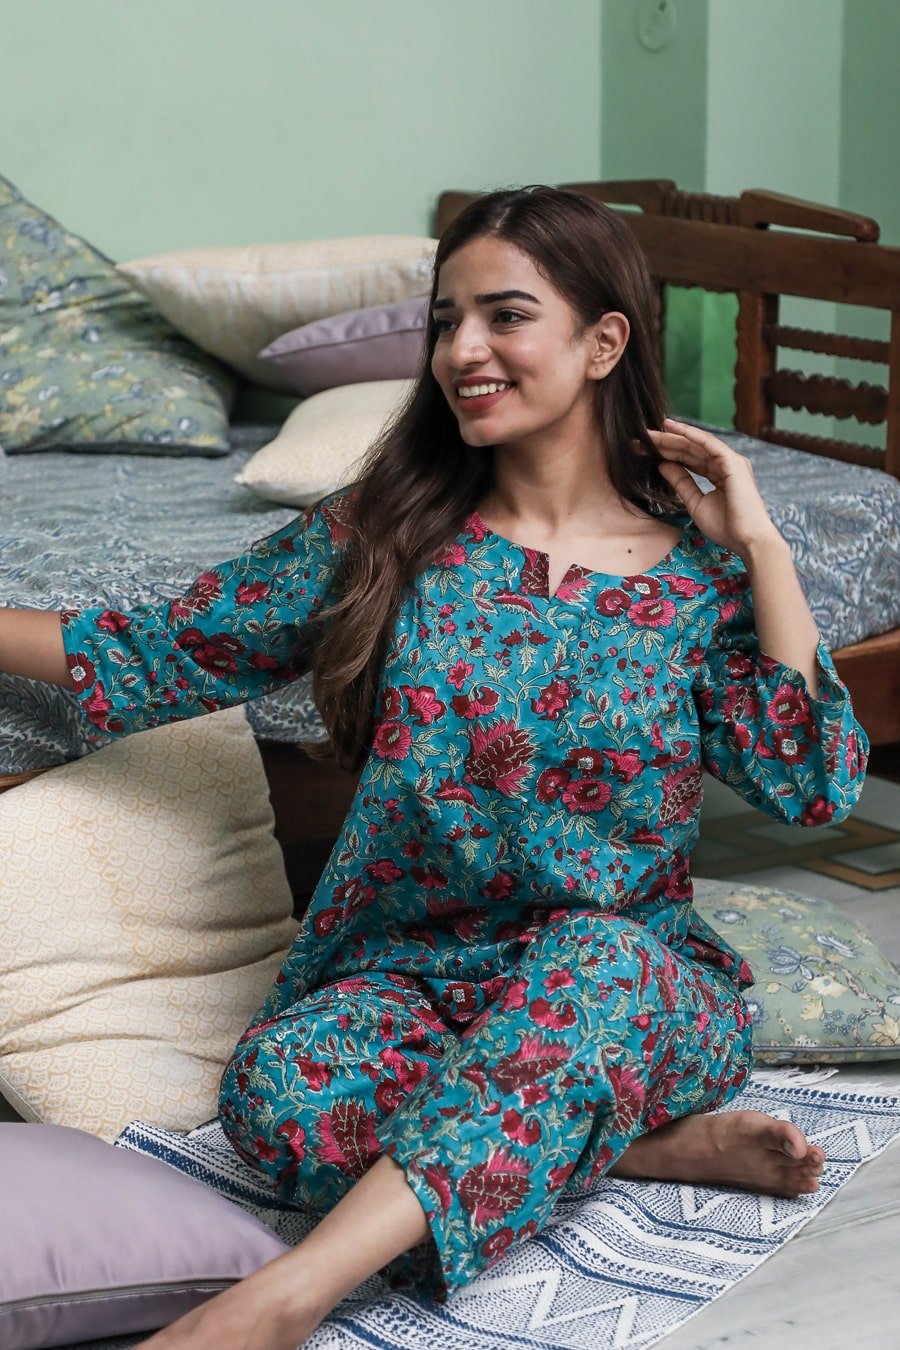 Buy Soft Touche Girls Printed Night Suit, Half Sleeves Front Open Top &  Pajama Set. Girls Night Wear | Lounge Wear (100% Pure Cotton Hosiery  Material) Age 5-6 Yrs (G821-Blue) at Amazon.in